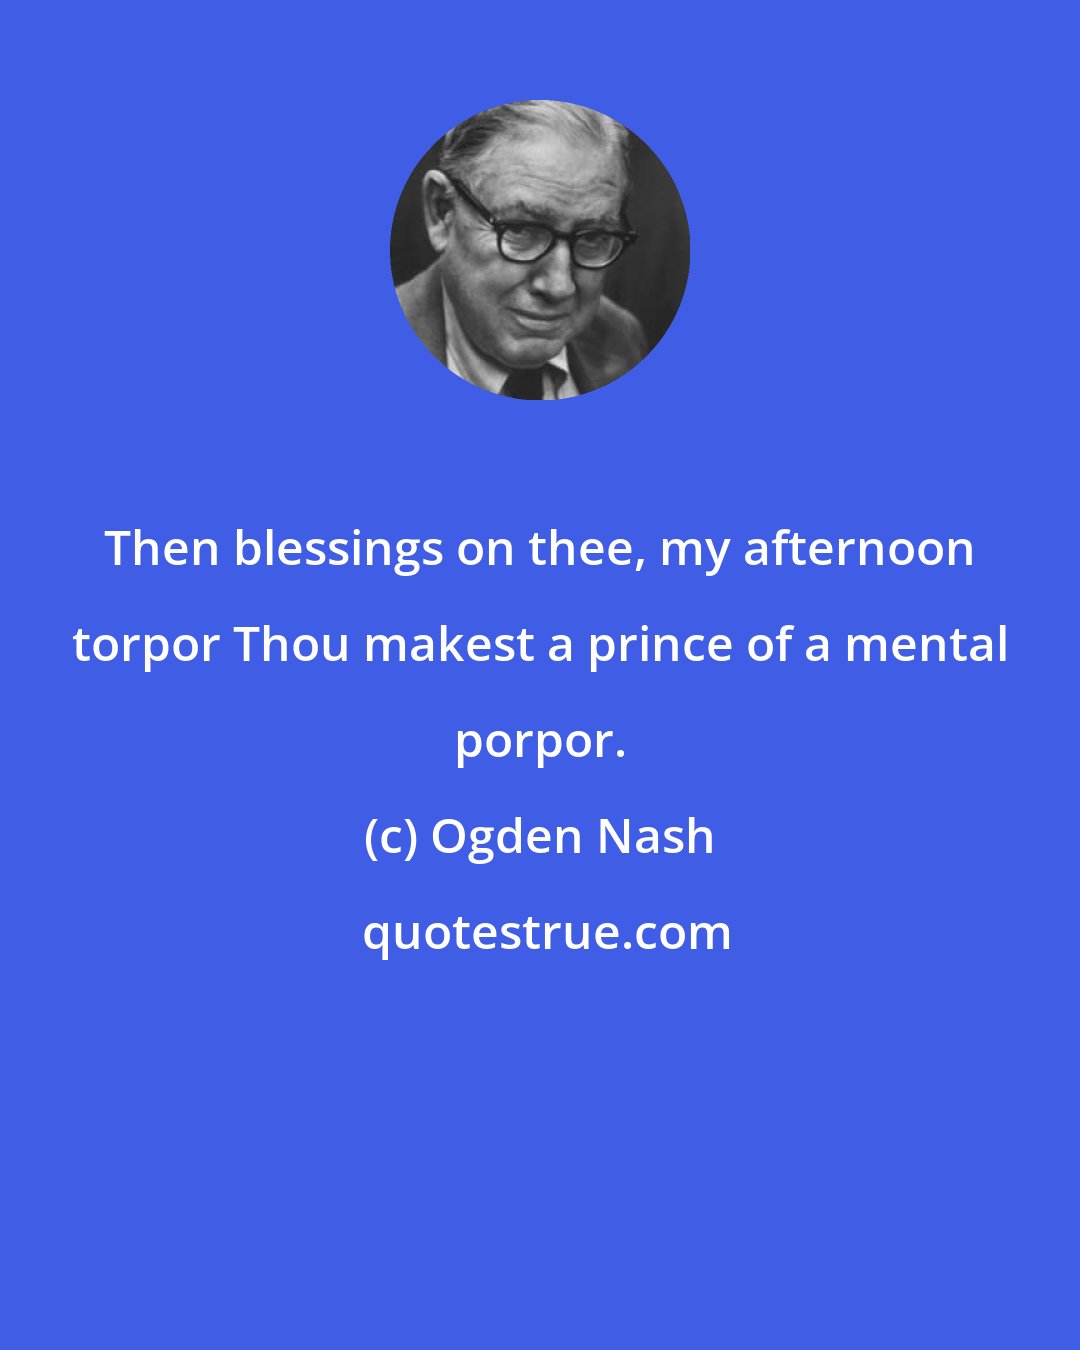 Ogden Nash: Then blessings on thee, my afternoon torpor Thou makest a prince of a mental porpor.